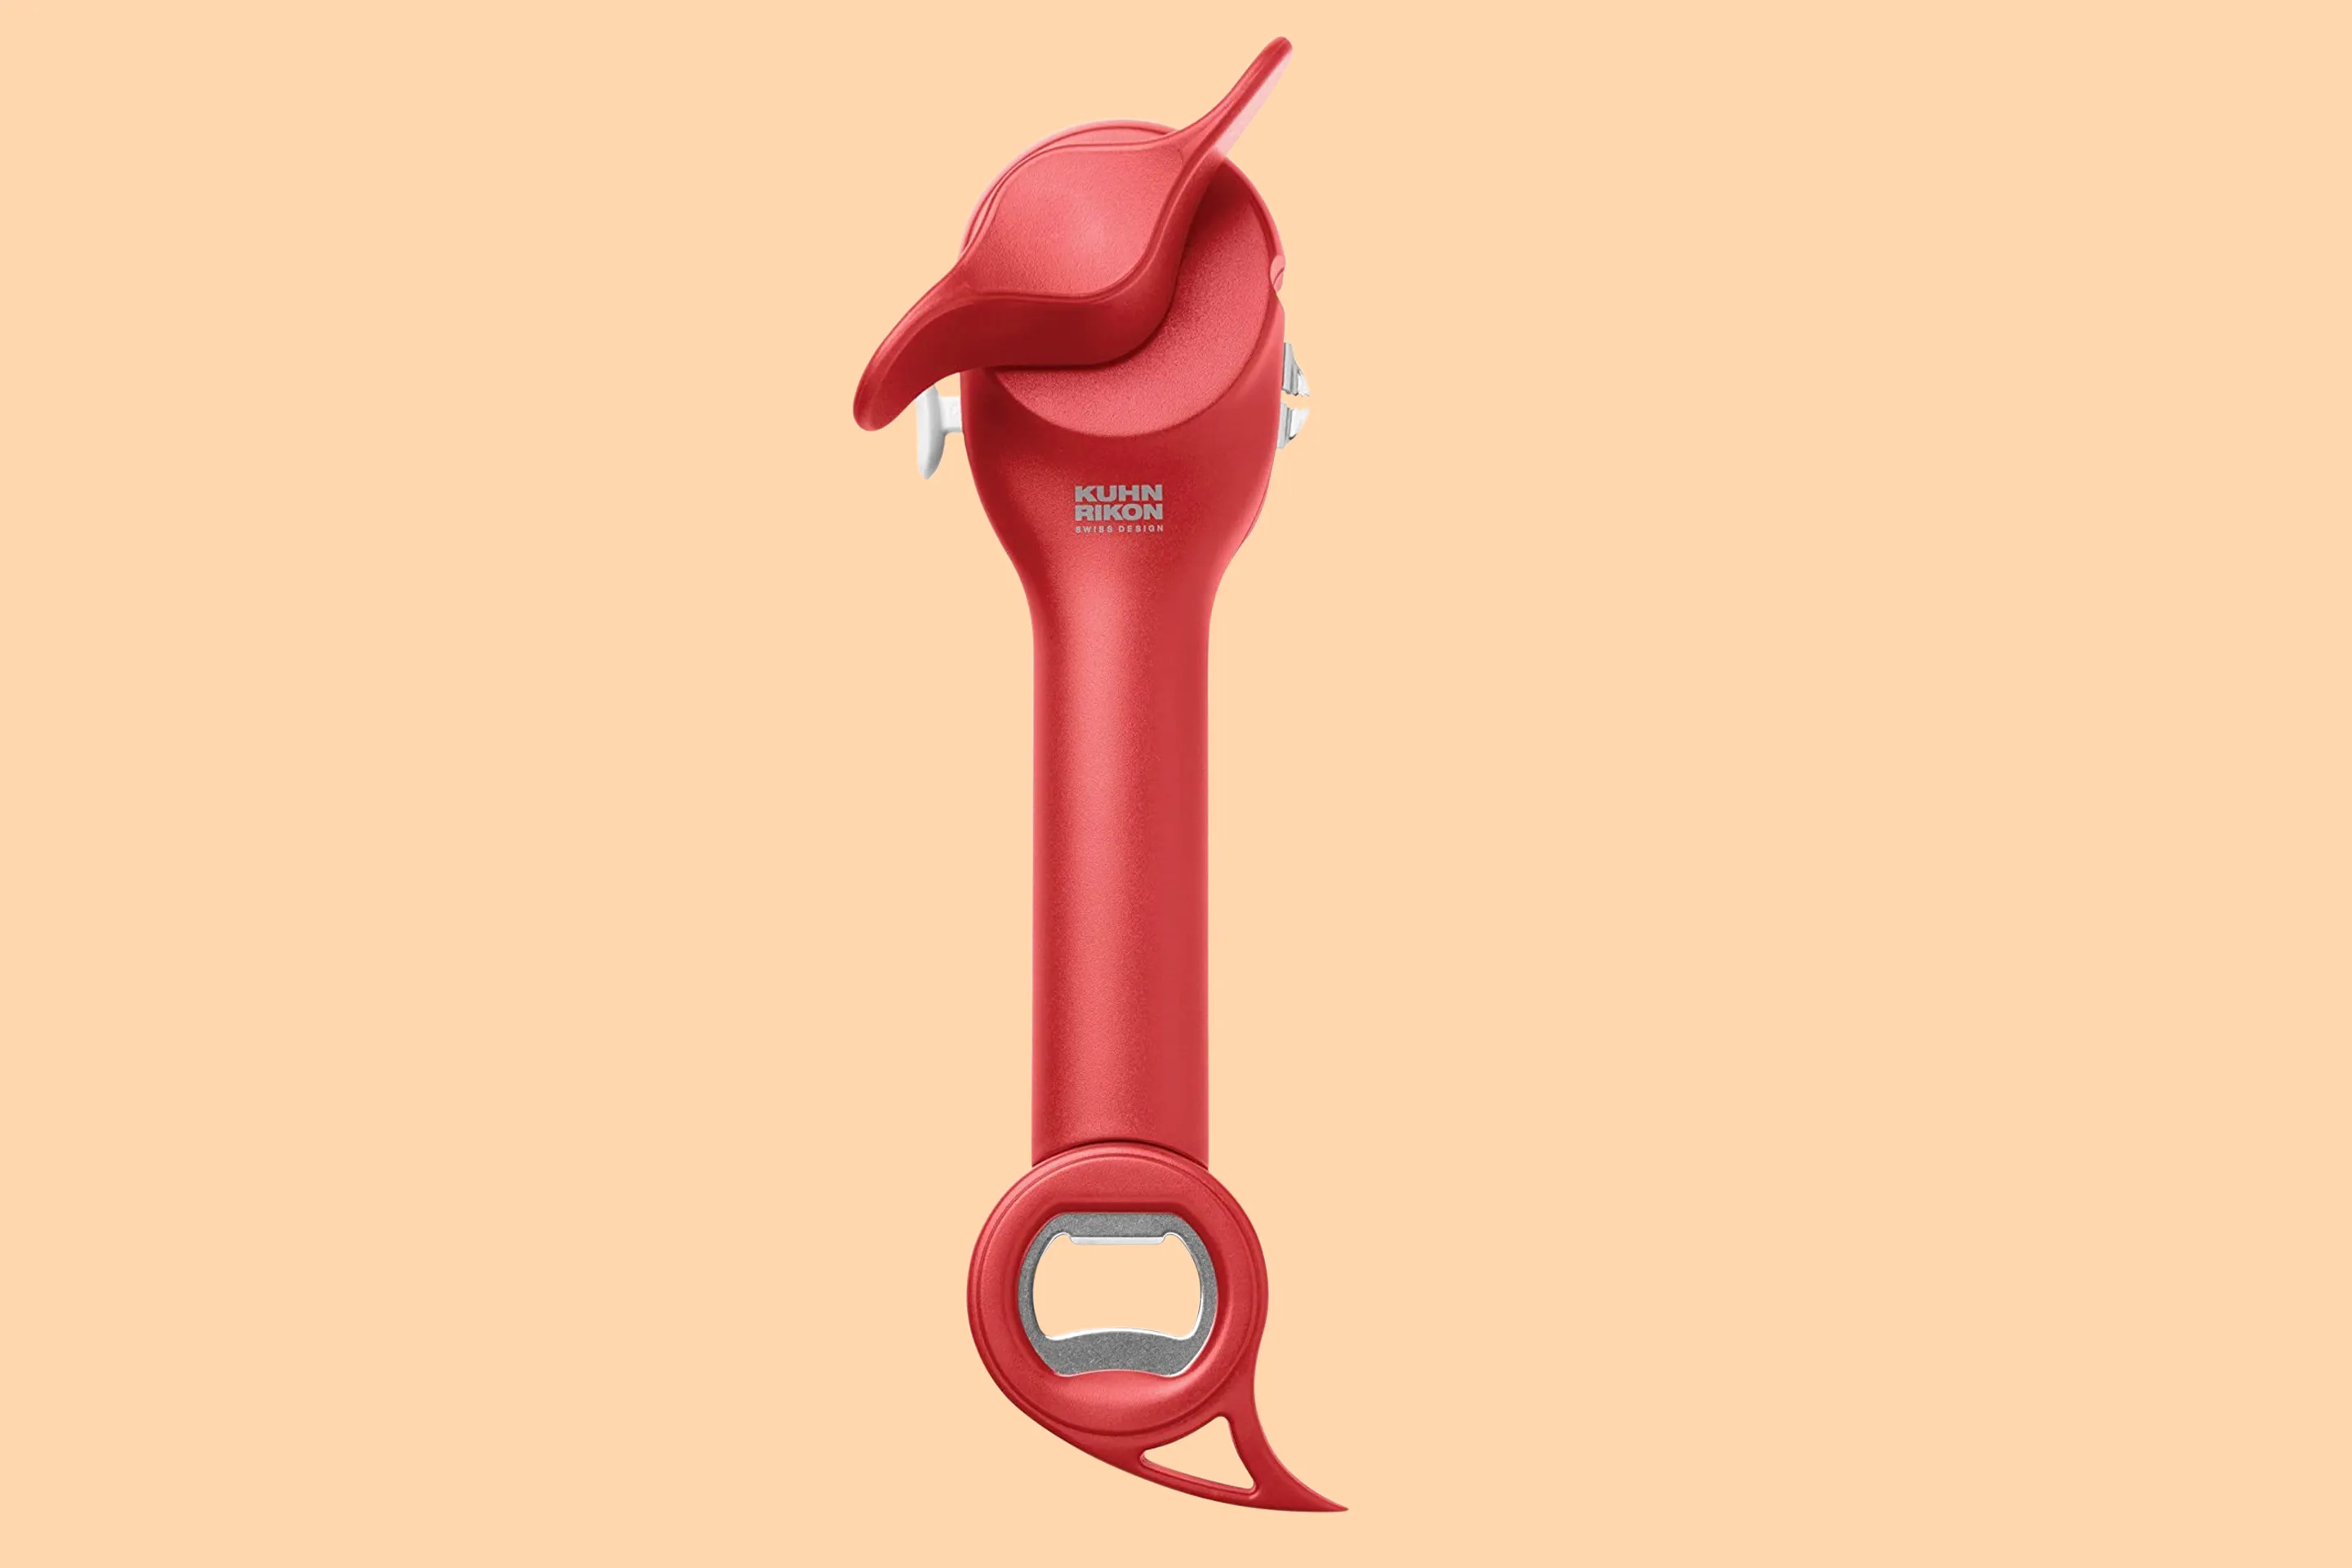 Kuhn Rikon Ultimate Can Opener with Auto Attach Feature with